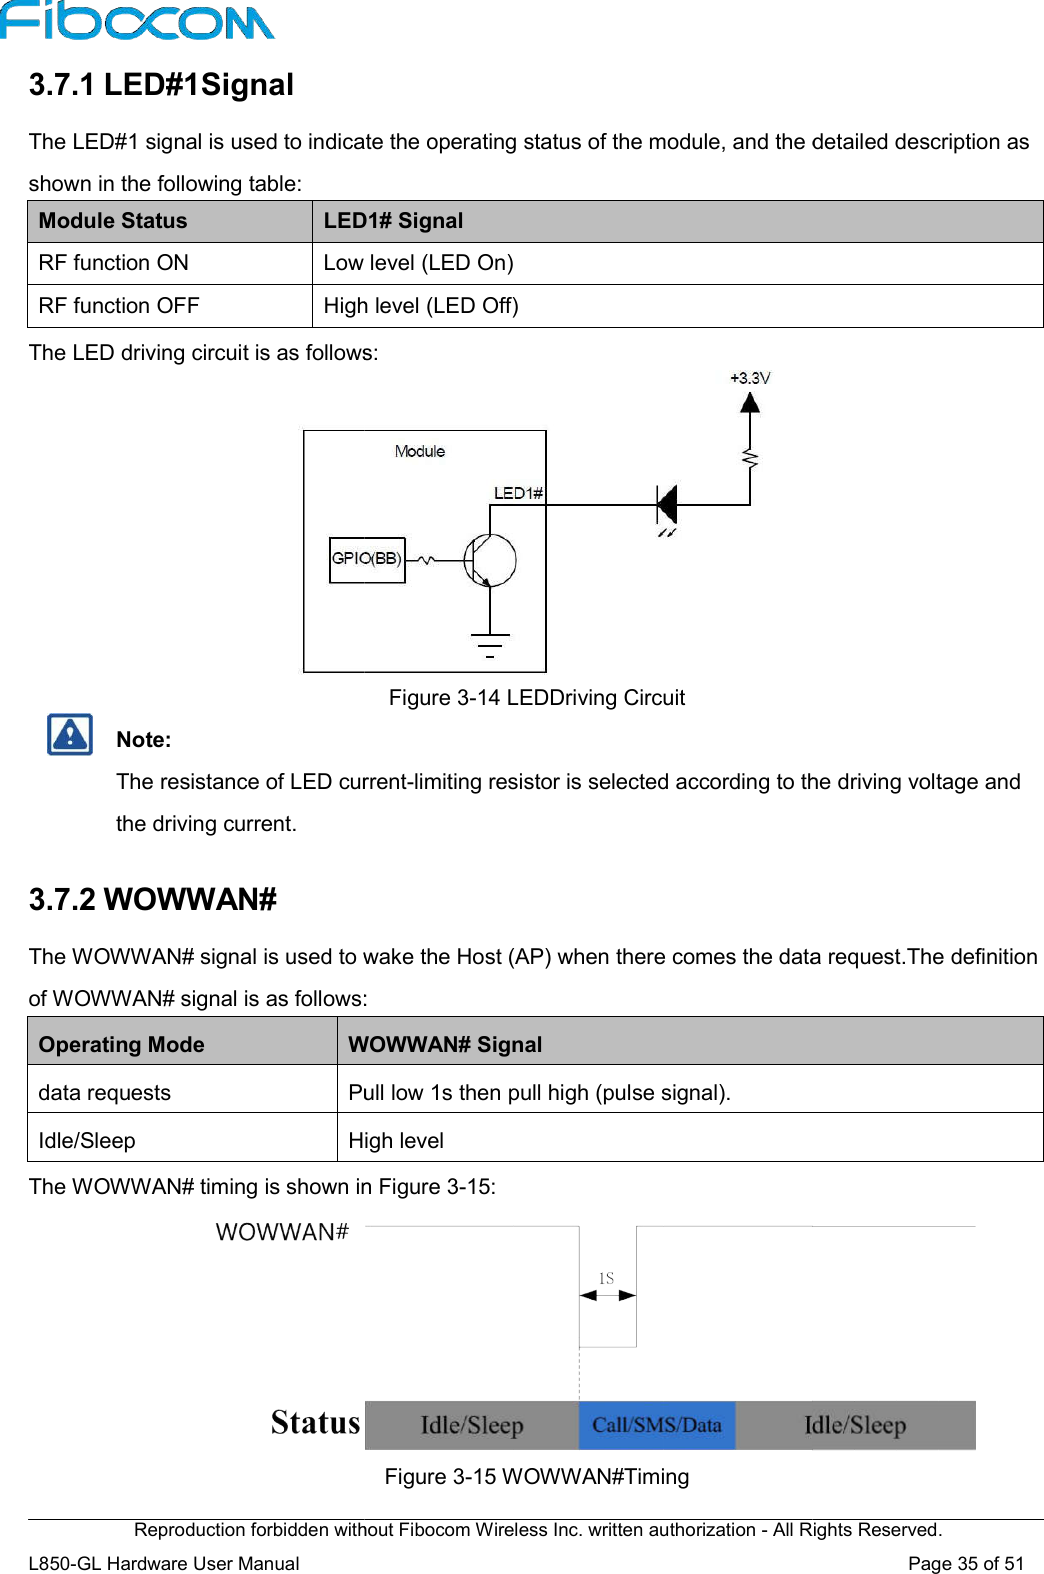 Reproduction forbidden without Fibocom Wireless IL850-GL Hardware User Manual    3.7.1 LED#1Signal The LED#1 signal is used to indicate the operating status of the module, and the detailed description as shown in the following table:      The LED driving circuit is as follows:Note: The resistance of LED currentthe driving current.  3.7.2 WOWWAN# The WOWWAN# signal is used to wake the Host (AP) when there comes the data request.The definition of WOWWAN# signal is as follows:      The WOWWAN# timing is shown in Figure 3Module Status LED1# RF function ON Low level (LED On)RF function OFF High level (LED Off)Operating Mode WOWWAN# Signaldata requests Pull low 1s then pull high (pulse Idle/Sleep High levelReproduction forbidden without Fibocom Wireless Inc. written authorization - All Rights Reserved.The LED#1 signal is used to indicate the operating status of the module, and the detailed description as follows: Figure 3-14 LEDDriving Circuit The resistance of LED current-limiting resistor is selected according to the driving voltage and The WOWWAN# signal is used to wake the Host (AP) when there comes the data request.The definition of WOWWAN# signal is as follows: The WOWWAN# timing is shown in Figure 3-15: Figure 3-15 WOWWAN#Timing LED1# Signal Low level (LED On) High level (LED Off) WOWWAN# Signal Pull low 1s then pull high (pulse signal). High level All Rights Reserved. Page 35 of 51 The LED#1 signal is used to indicate the operating status of the module, and the detailed description as limiting resistor is selected according to the driving voltage and The WOWWAN# signal is used to wake the Host (AP) when there comes the data request.The definition 